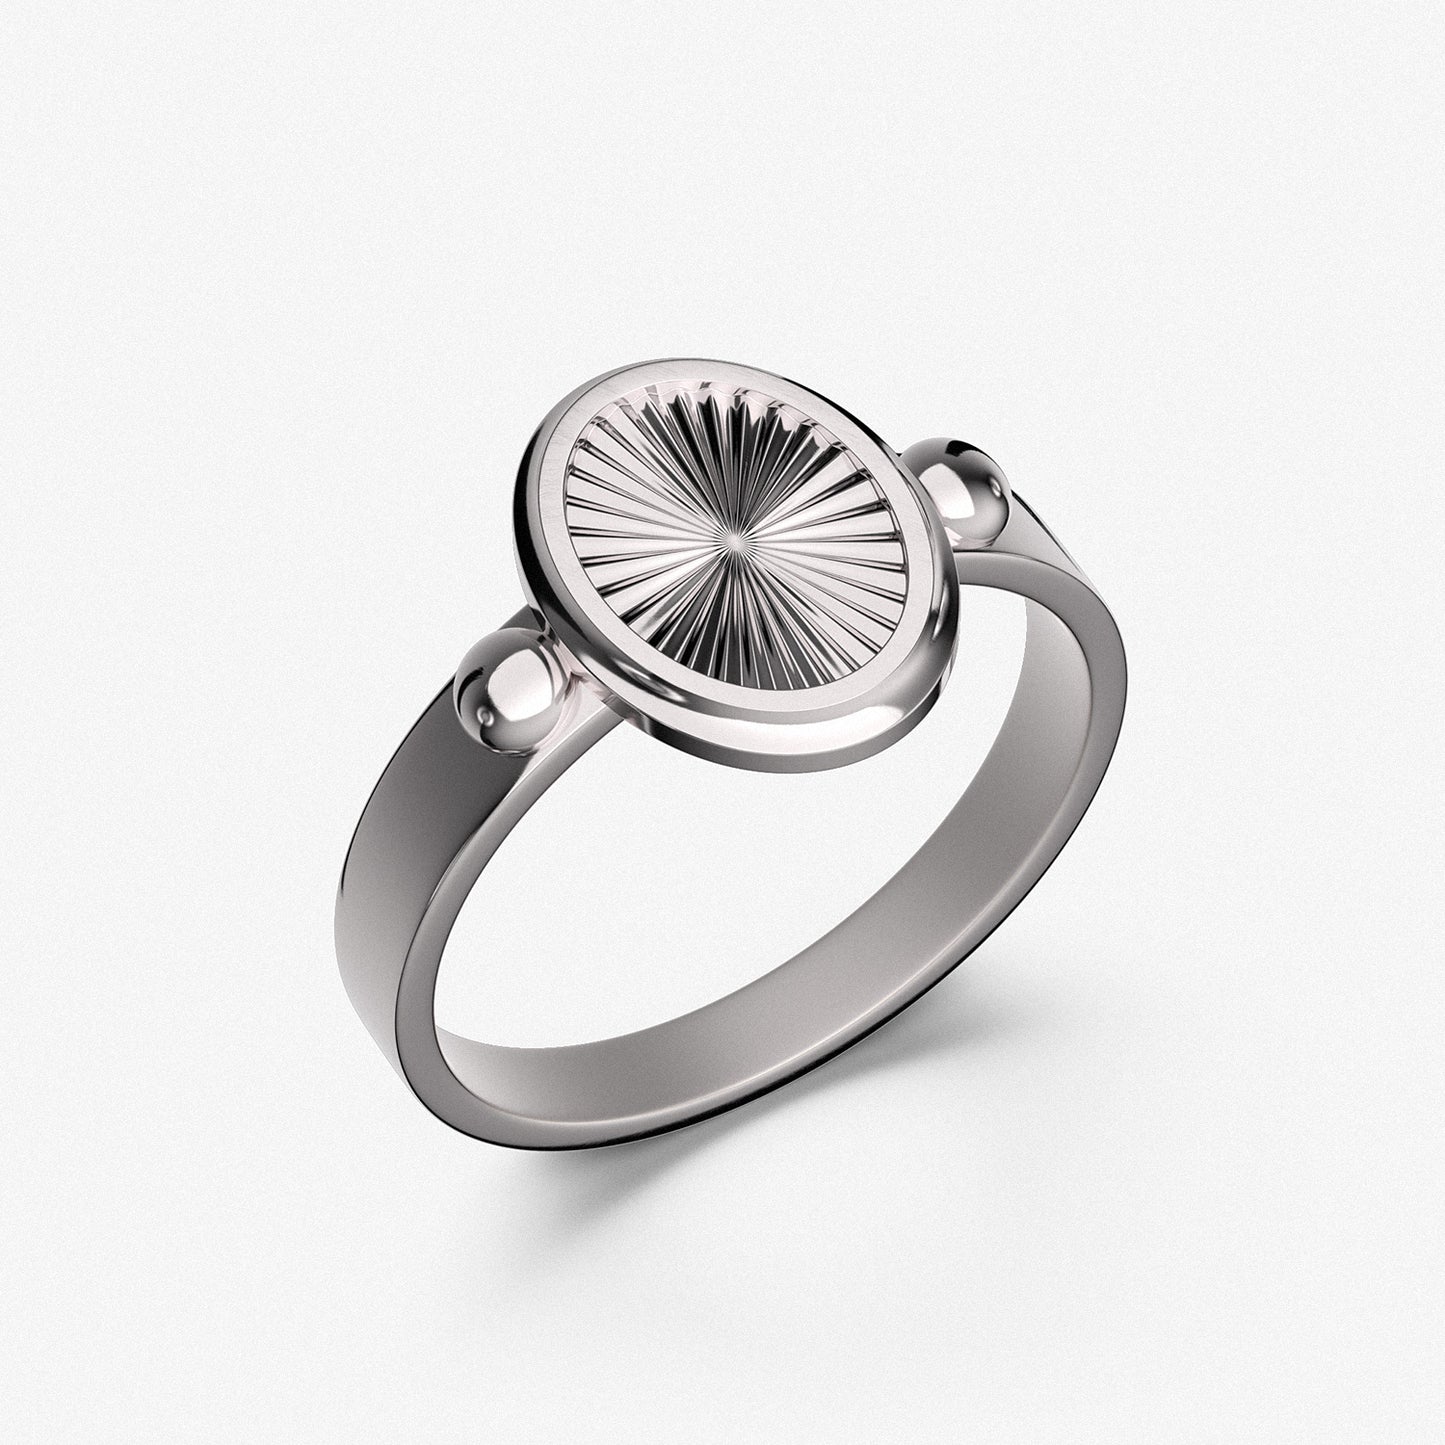 Silver Ring "Helios"